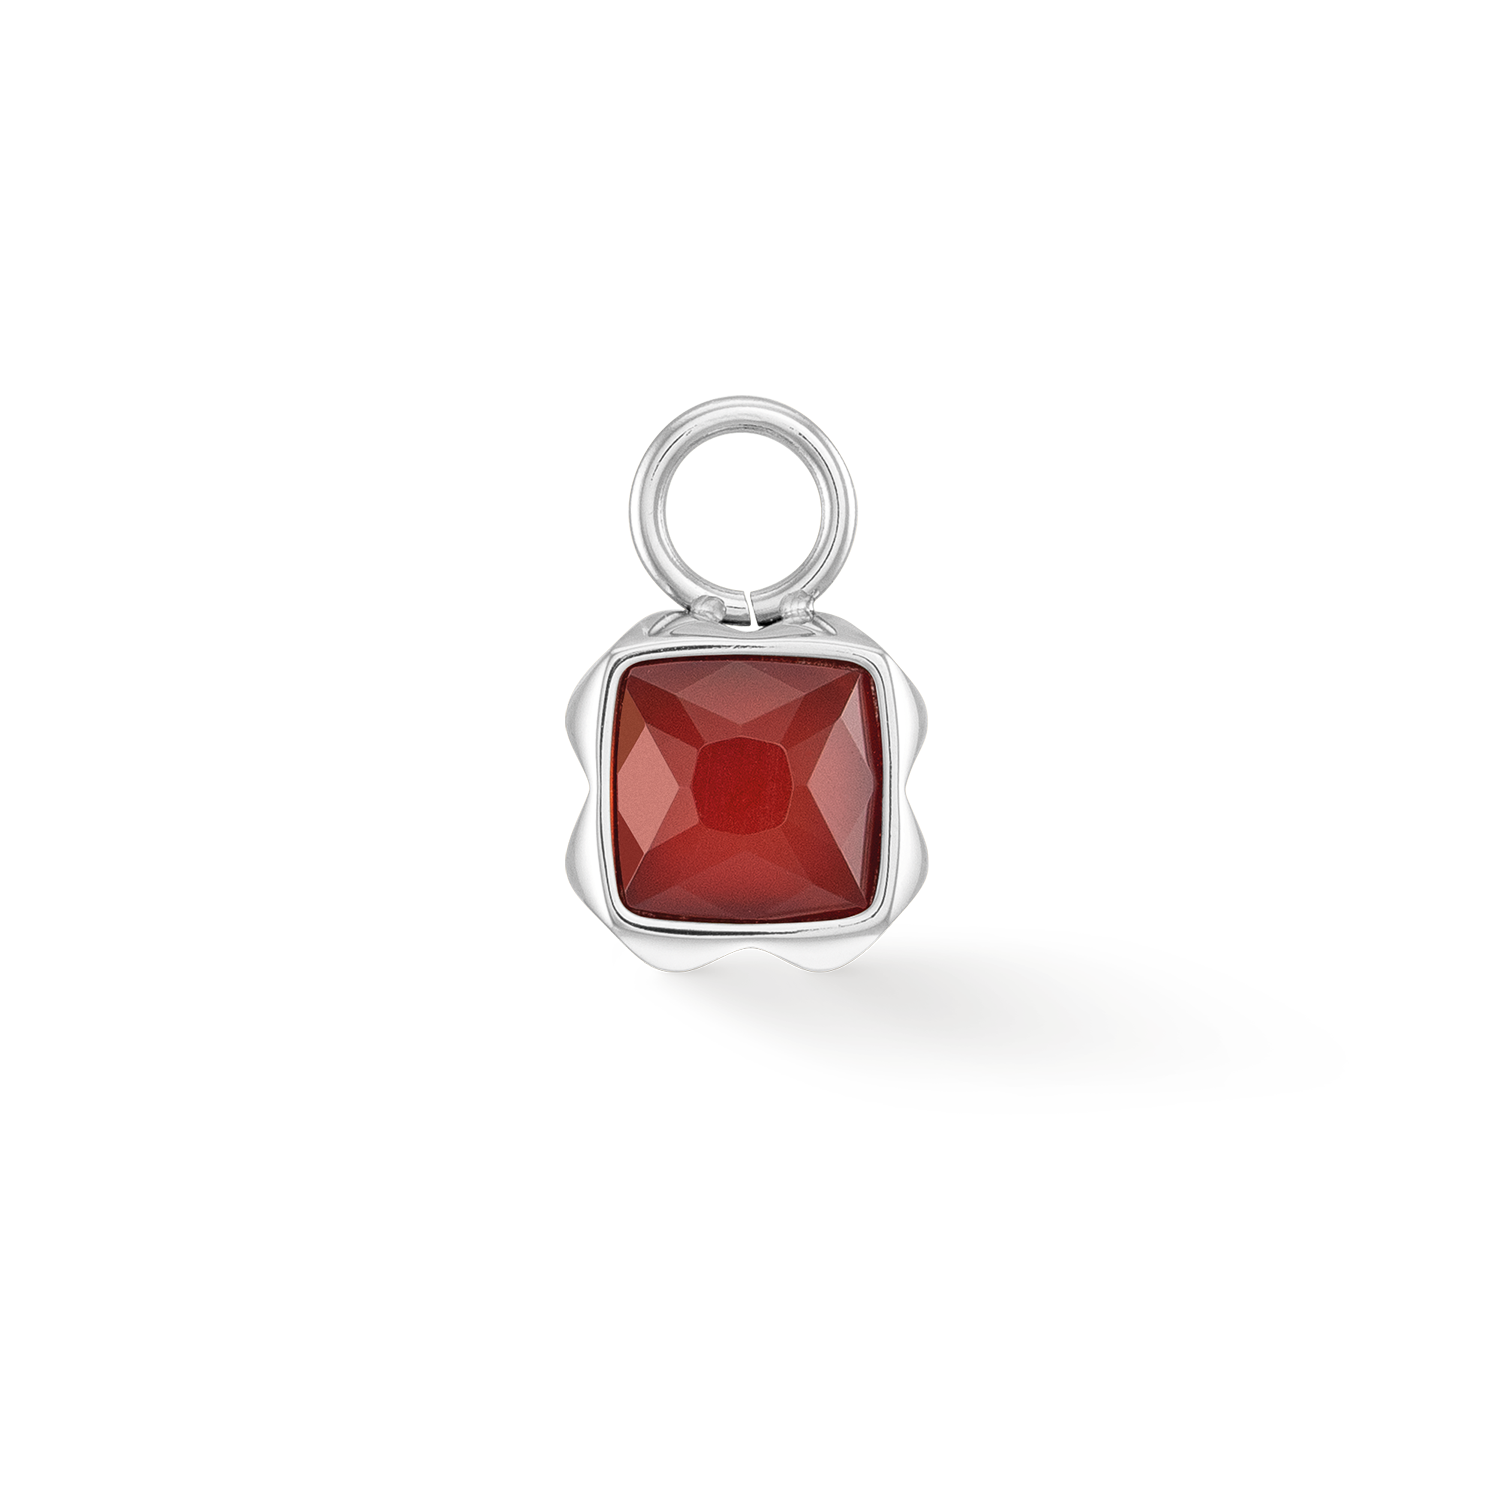 Birthstone January Charm Red Agate Silver